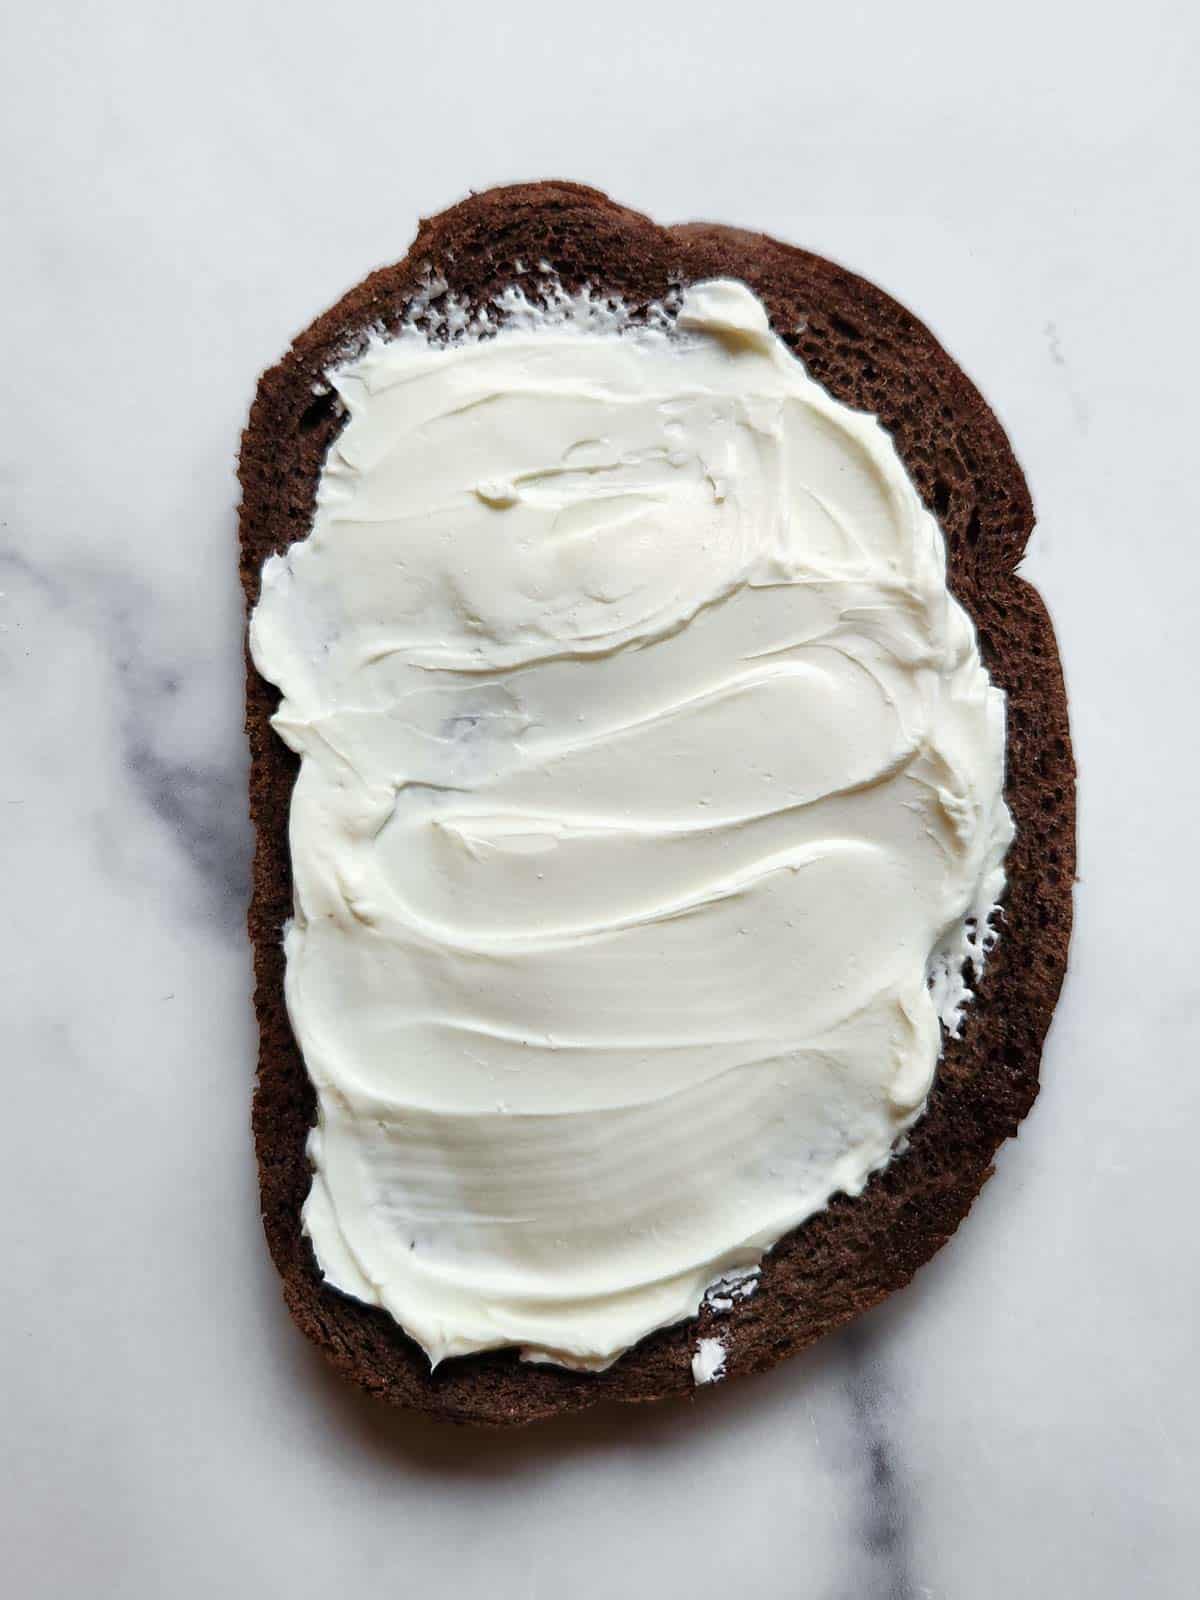 Pumpernickel bread with cream cheese on a white background.